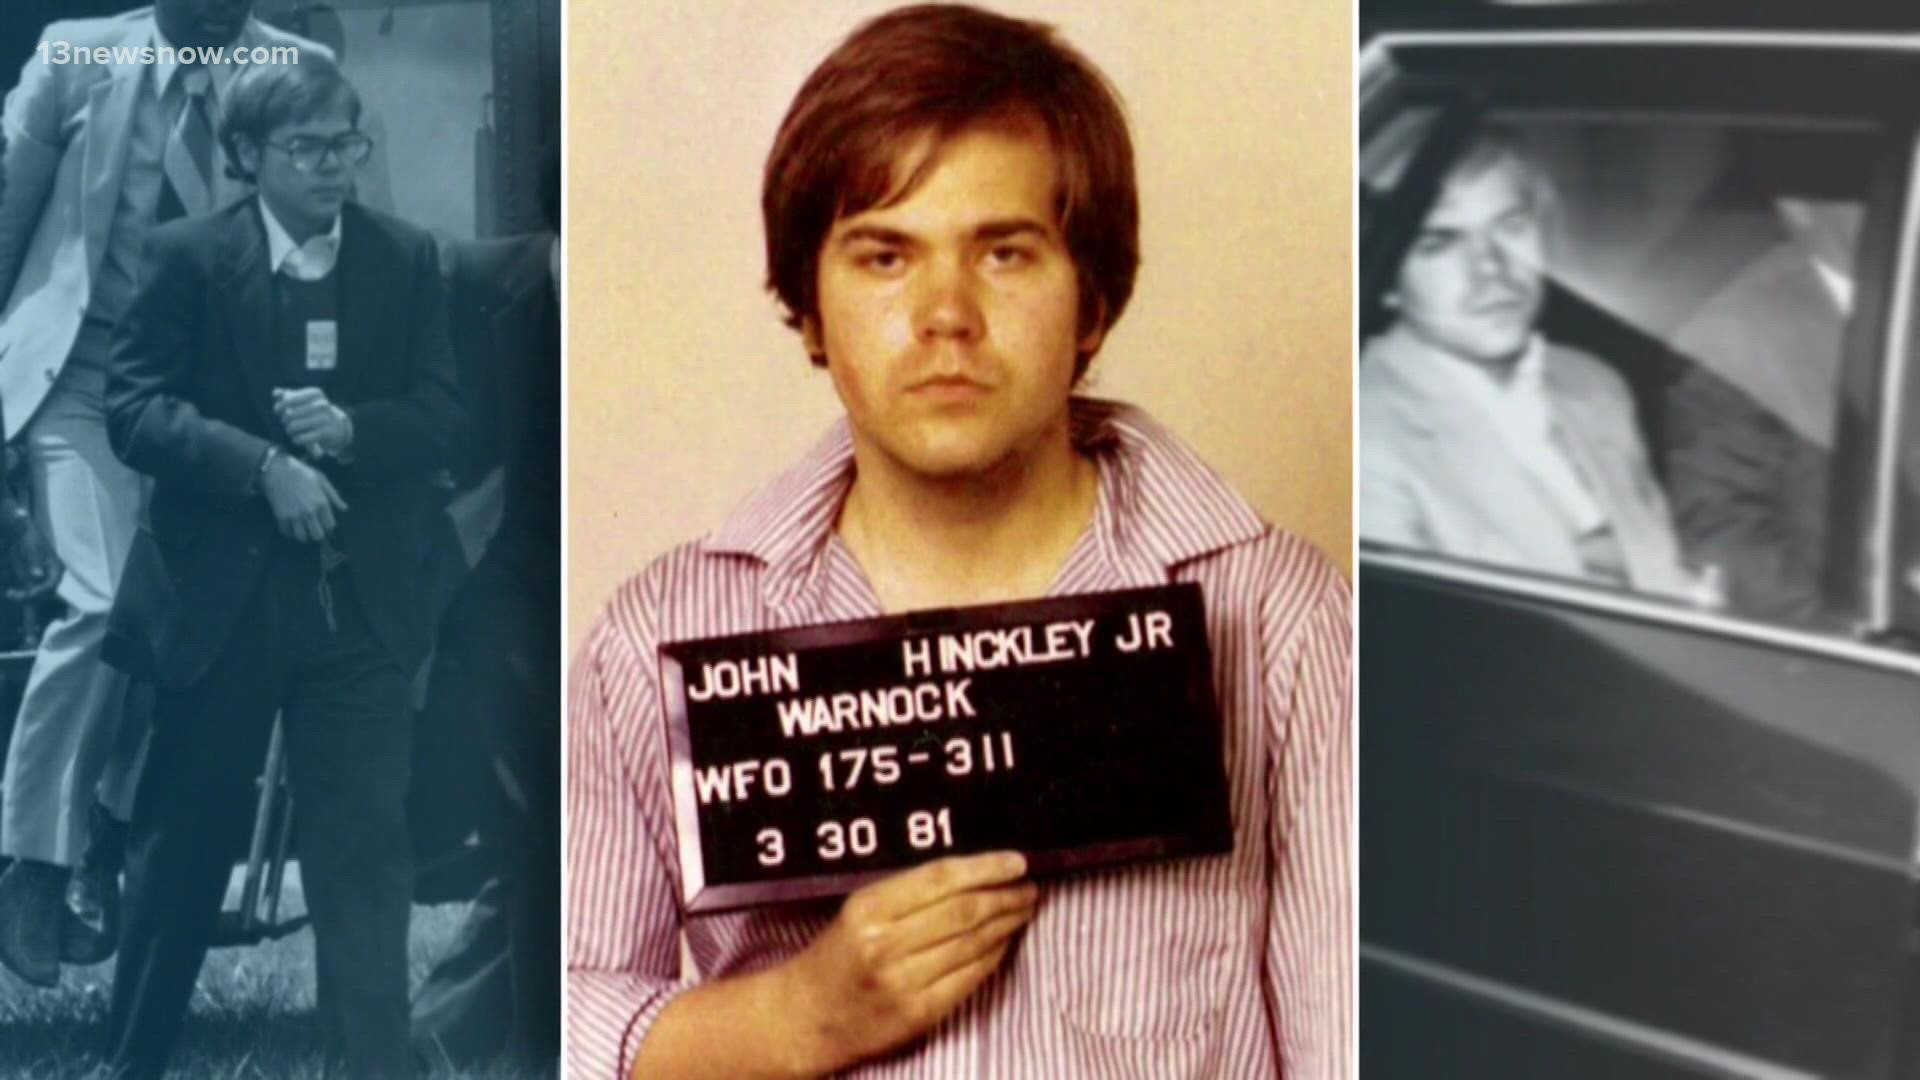 A federal judge will lift all restrictions on John Hinckley Jr. next year if he remains mentally stable. Hinckley shot and injured President Ronald Reagan in 1981.